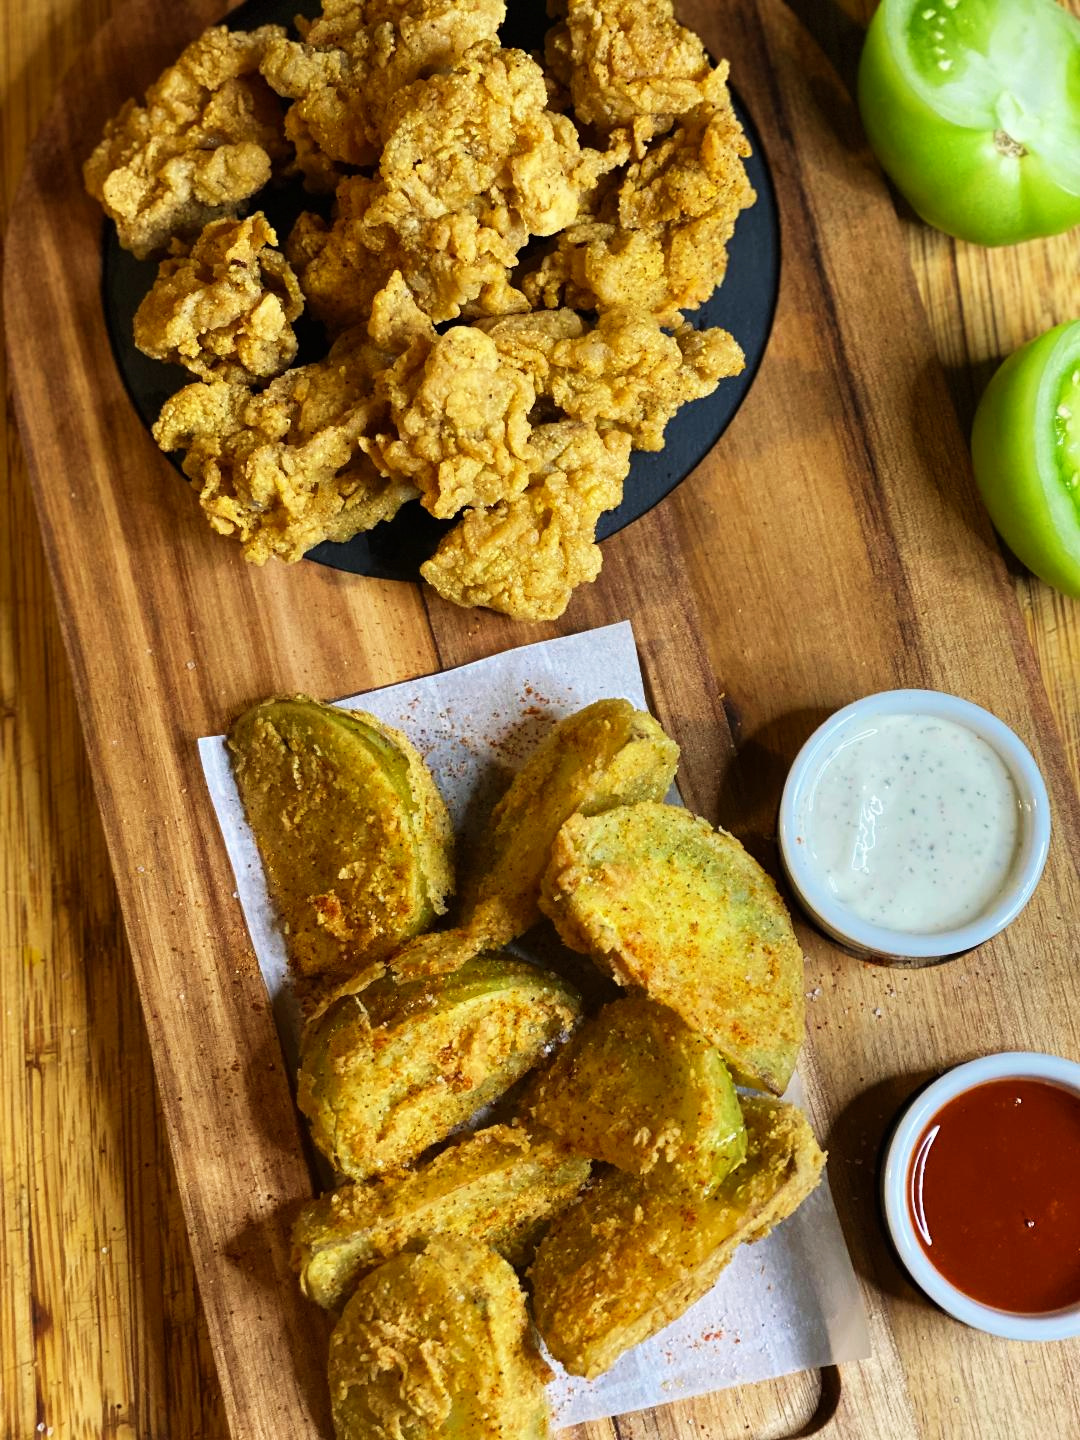 Crispy Southern Fried Oysters & Fried Green Tomato Wedges